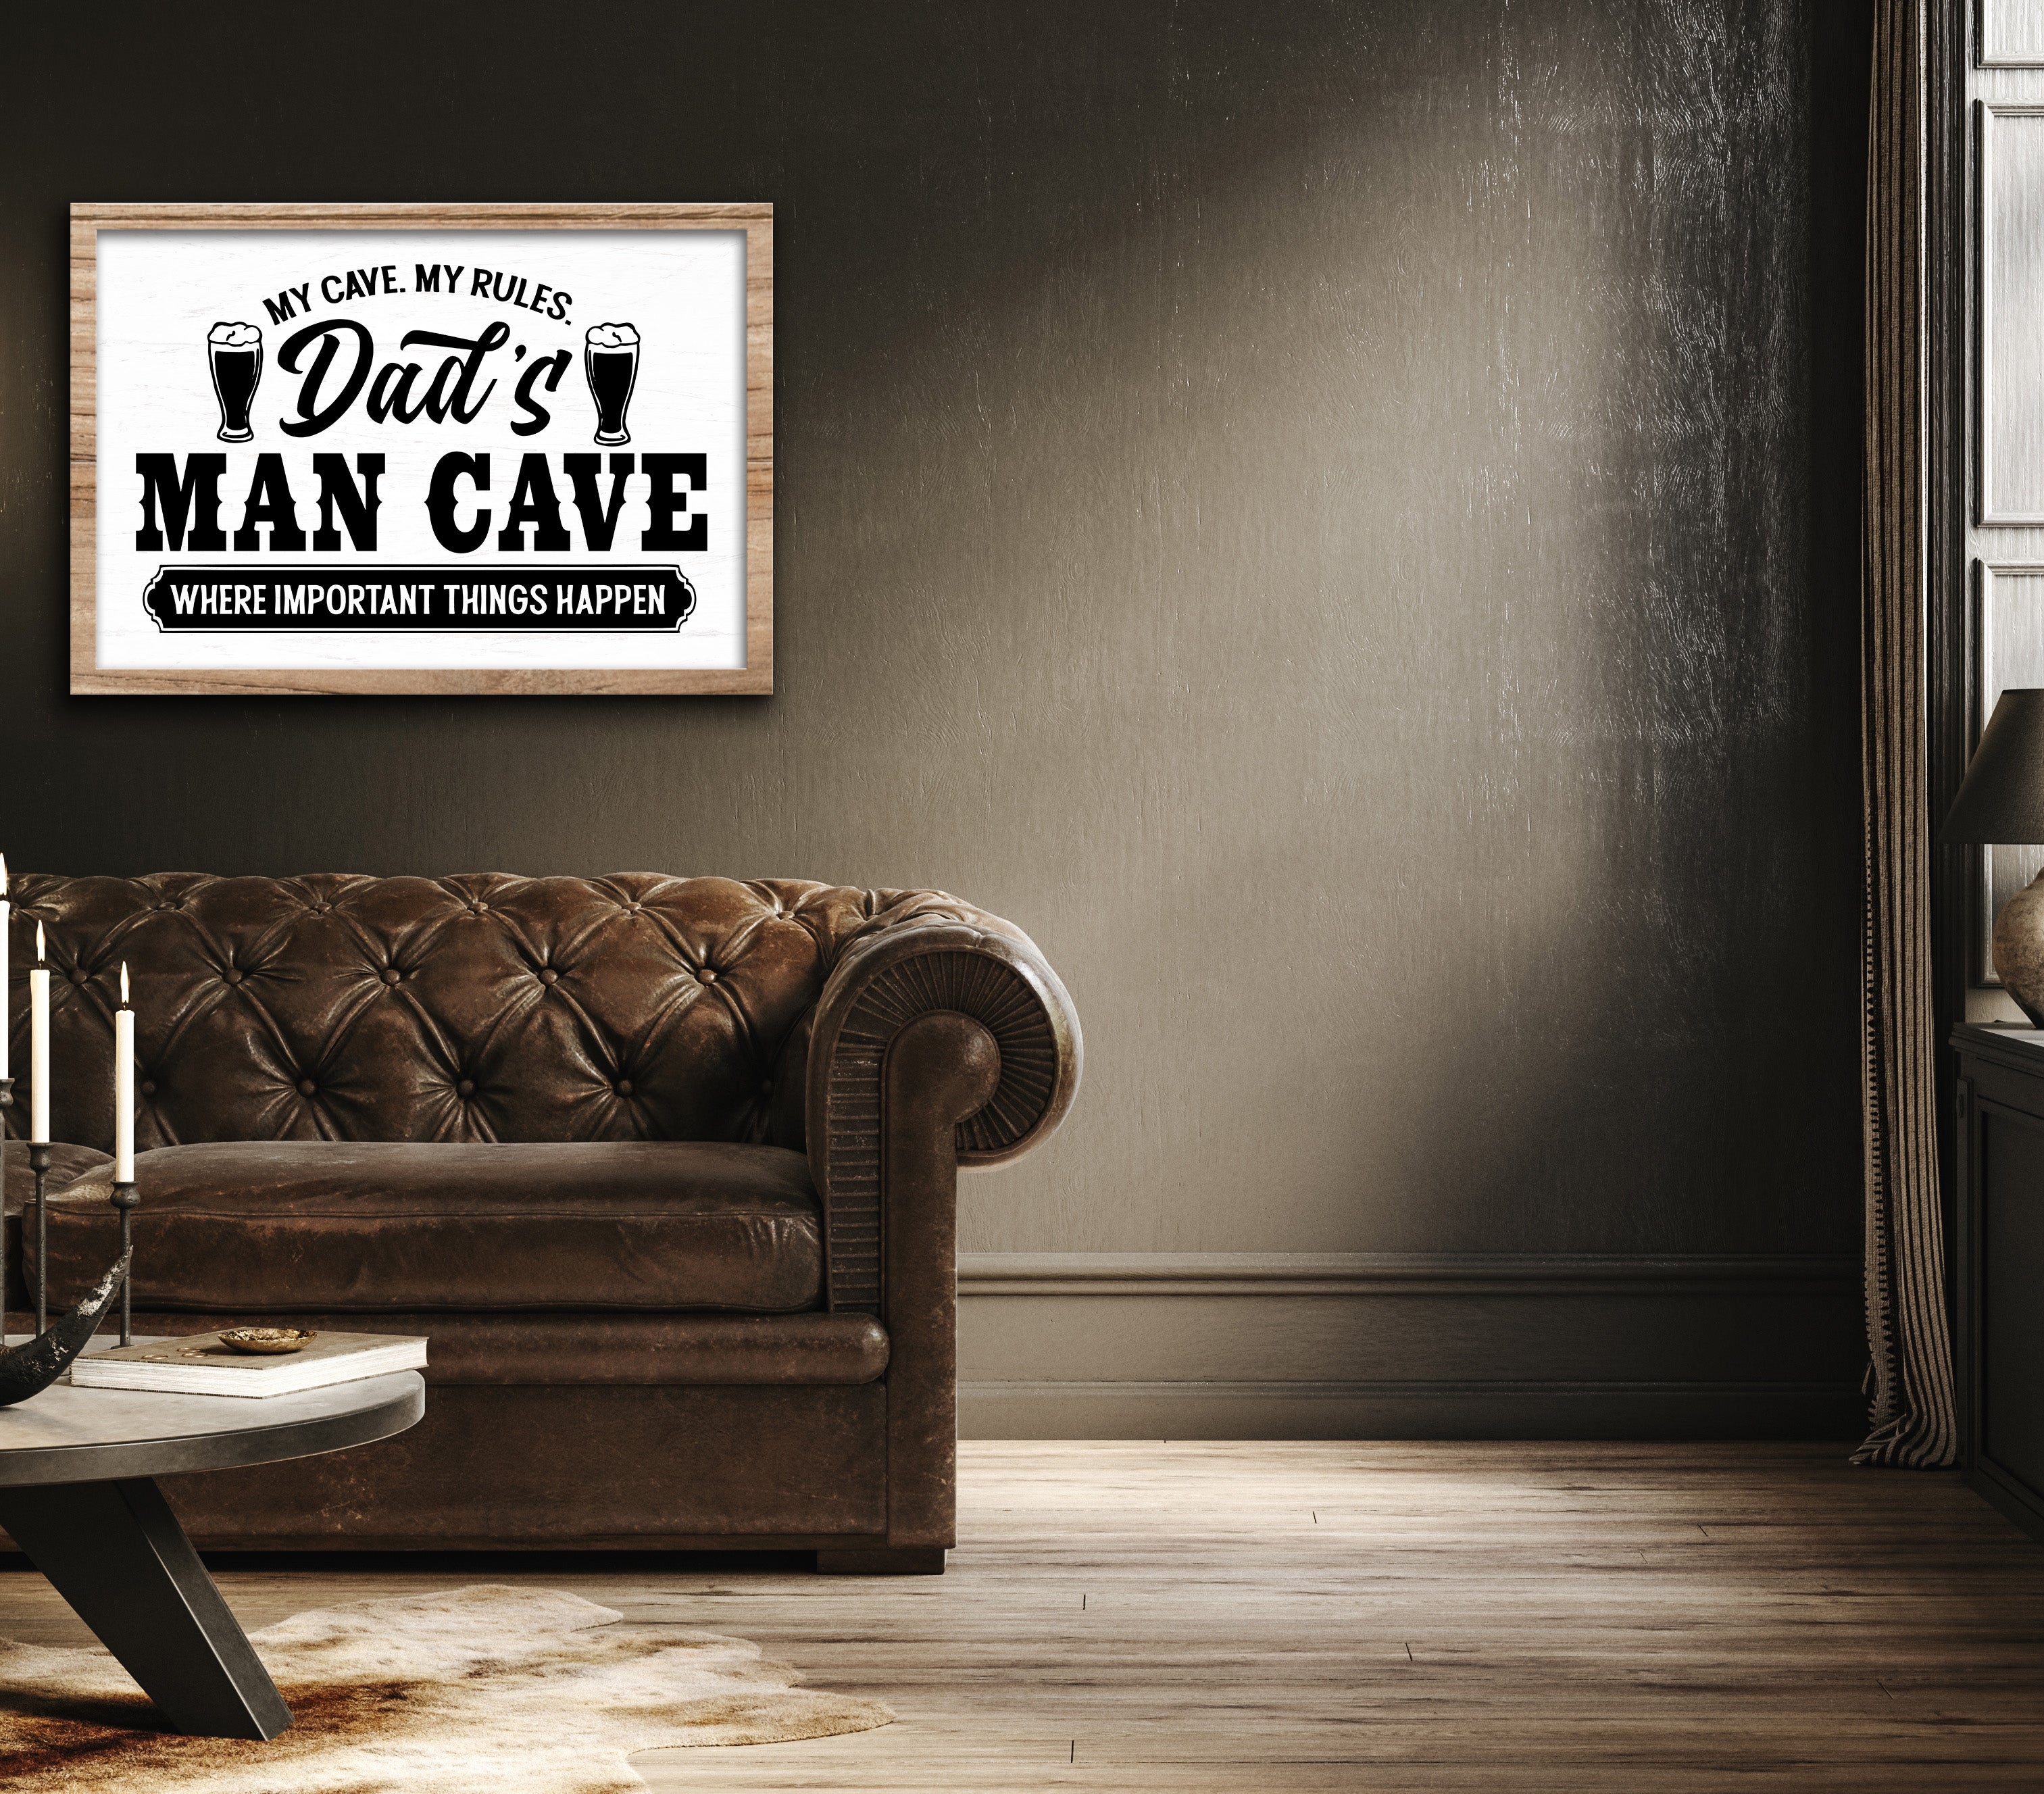 WELCOME TO THE MAN CAVE